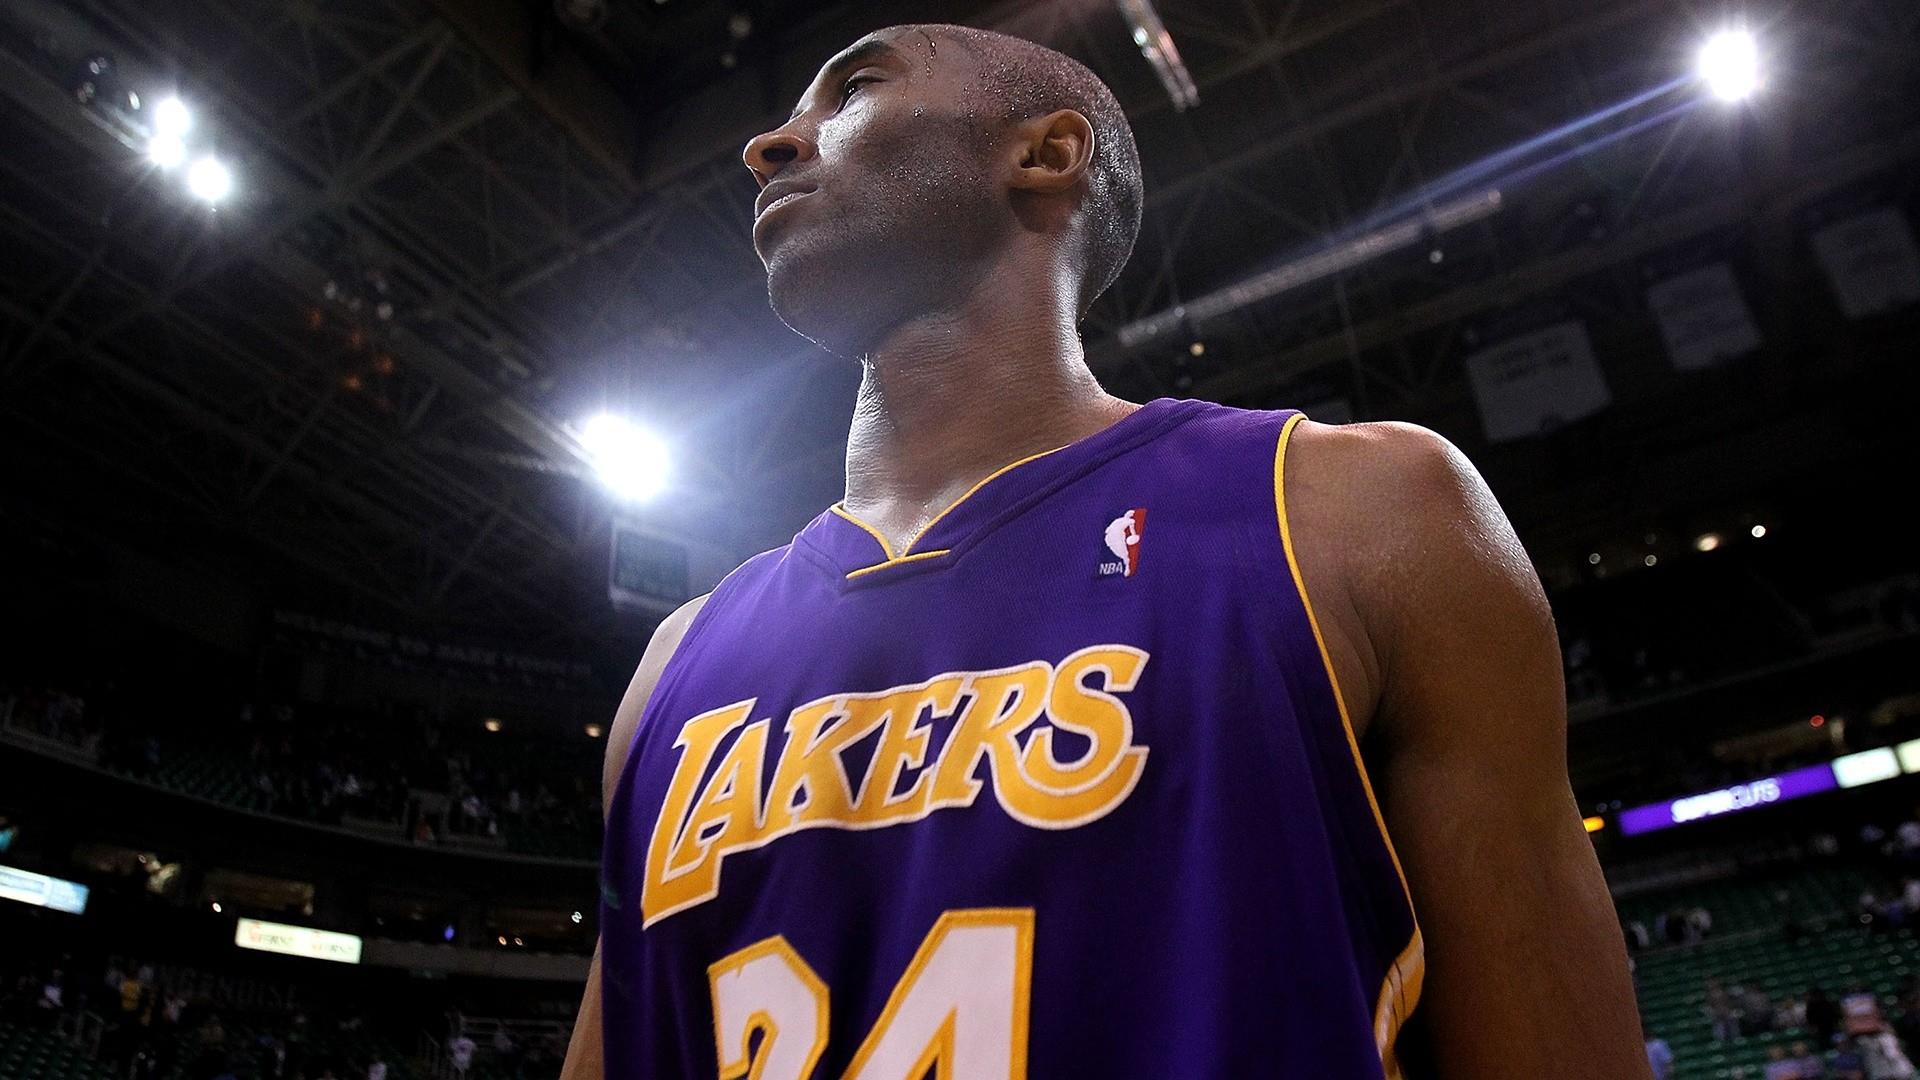 "Kobe Bryant Act," A New California Law Bans Sharing Crime Scene Photos After leaked Images Of Kobe Bryant's Helicopter Crash